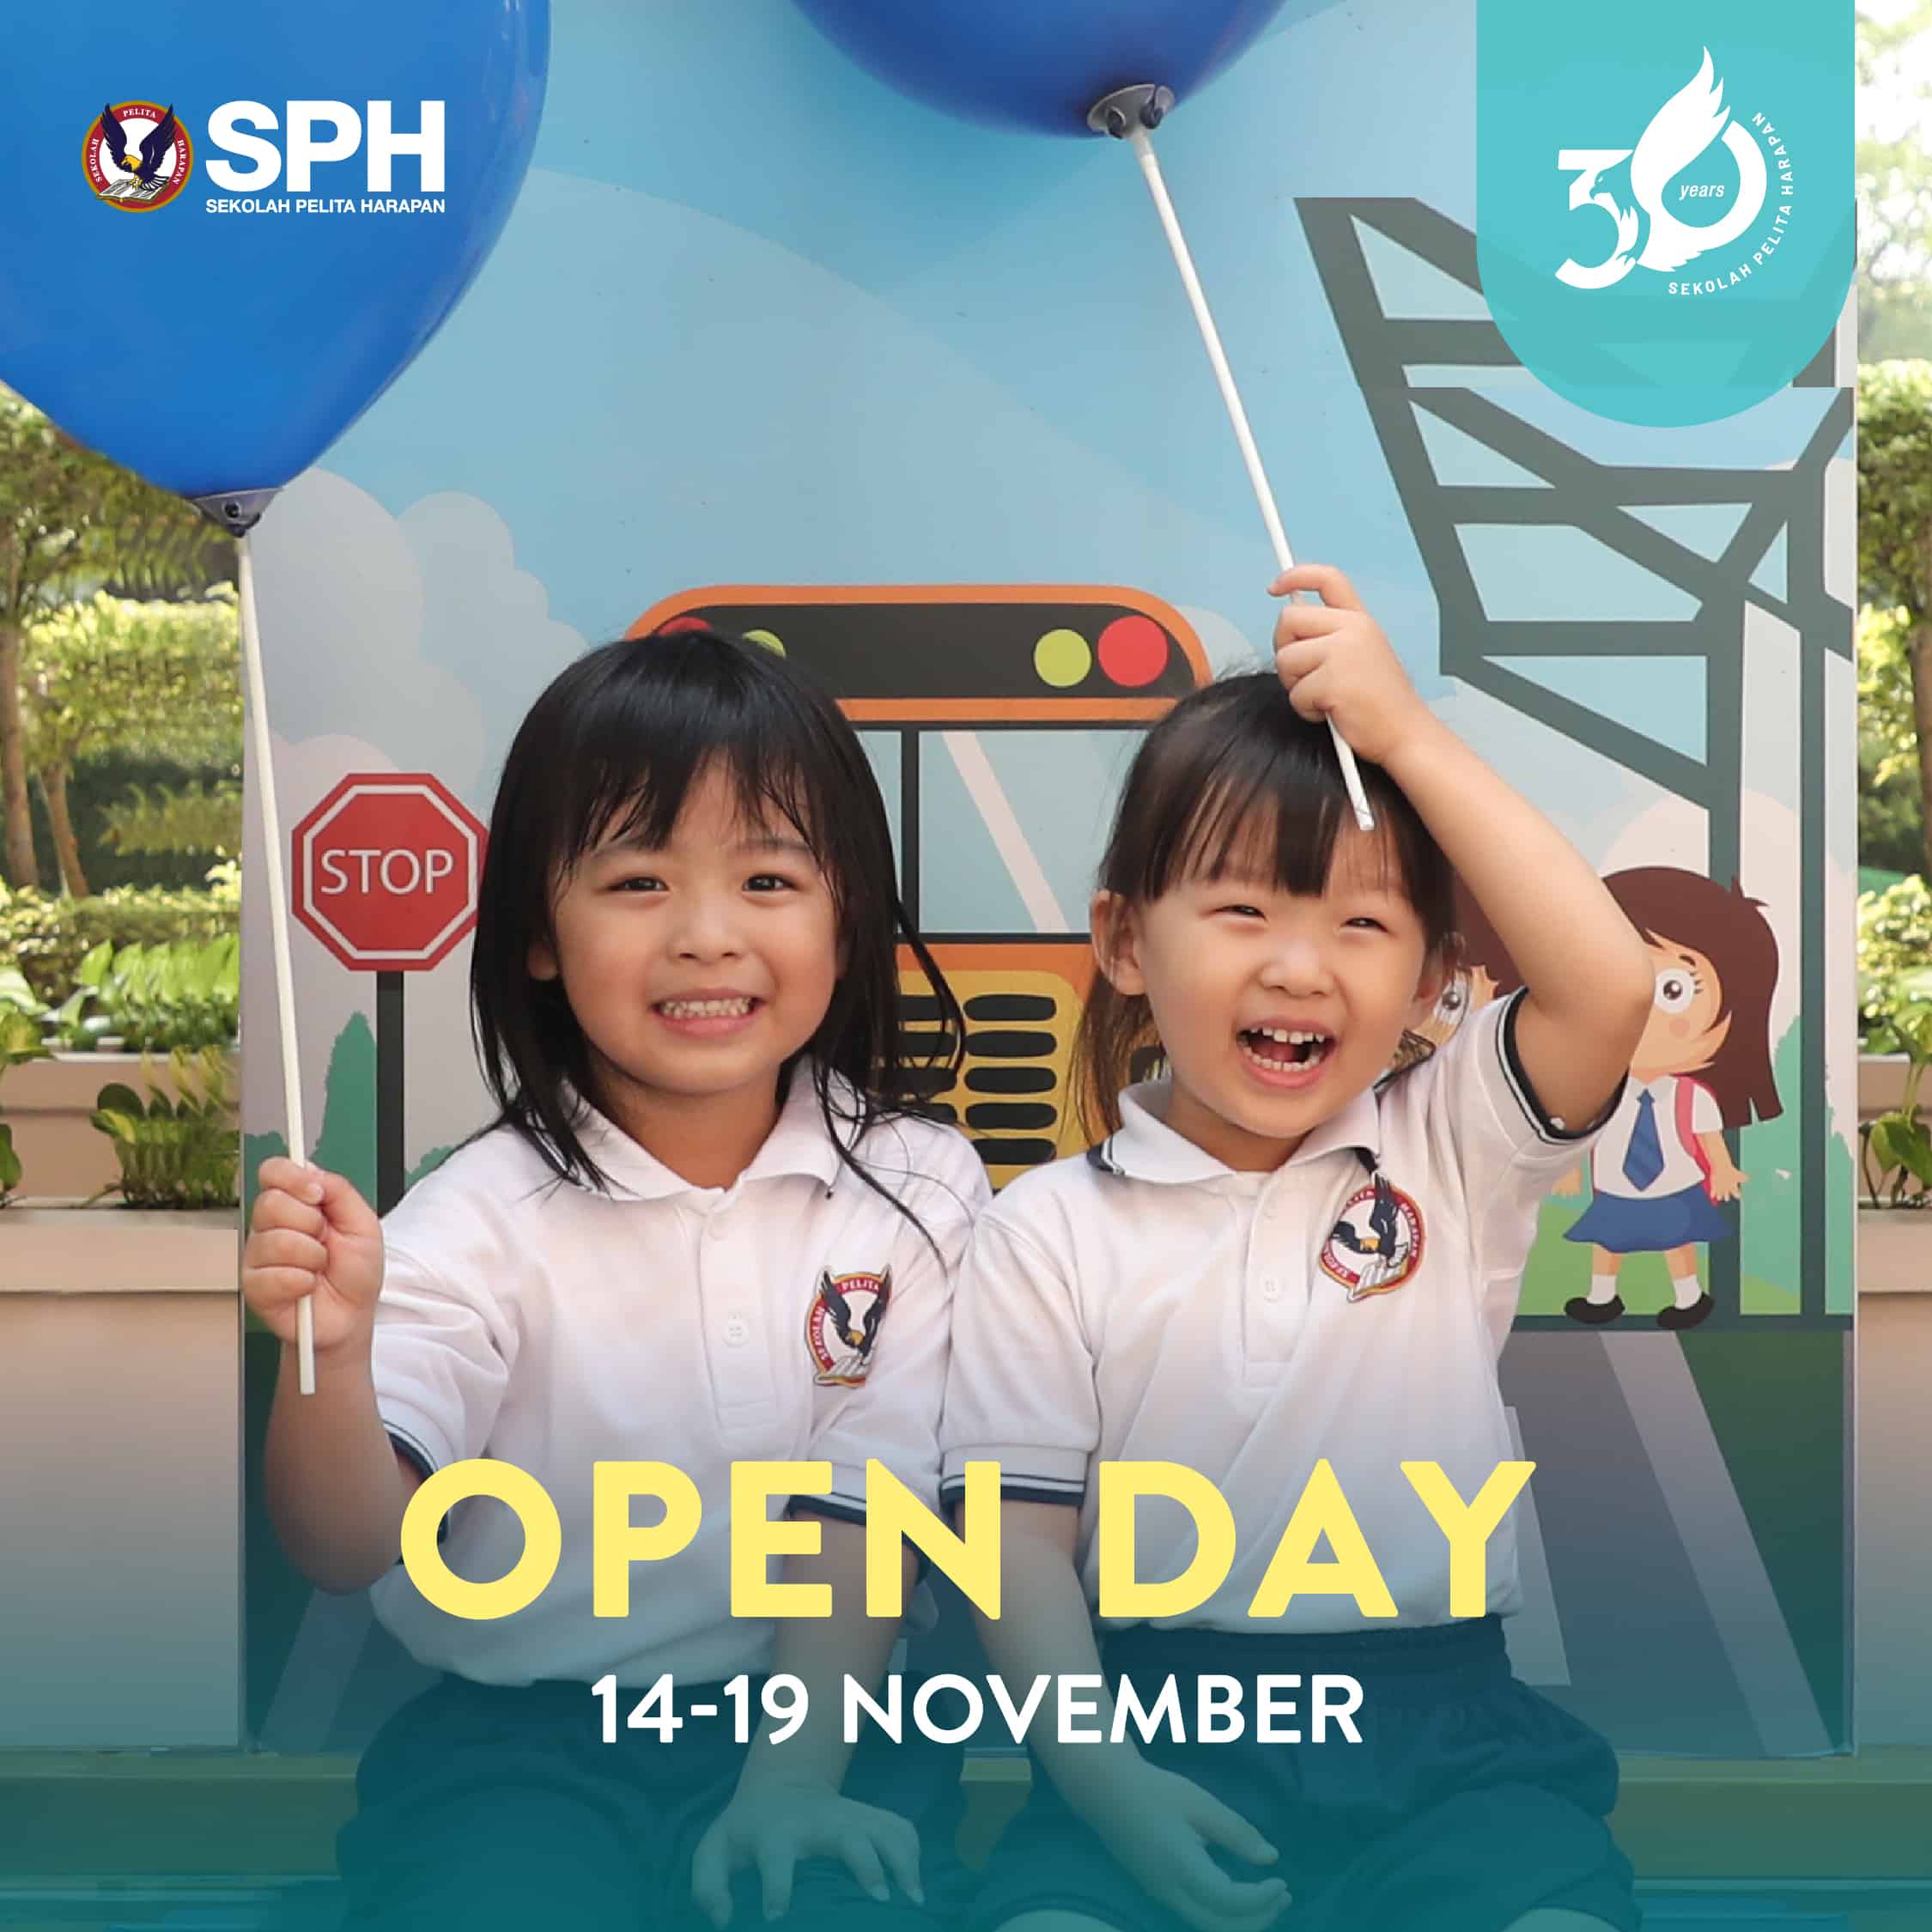 SPH Open Day